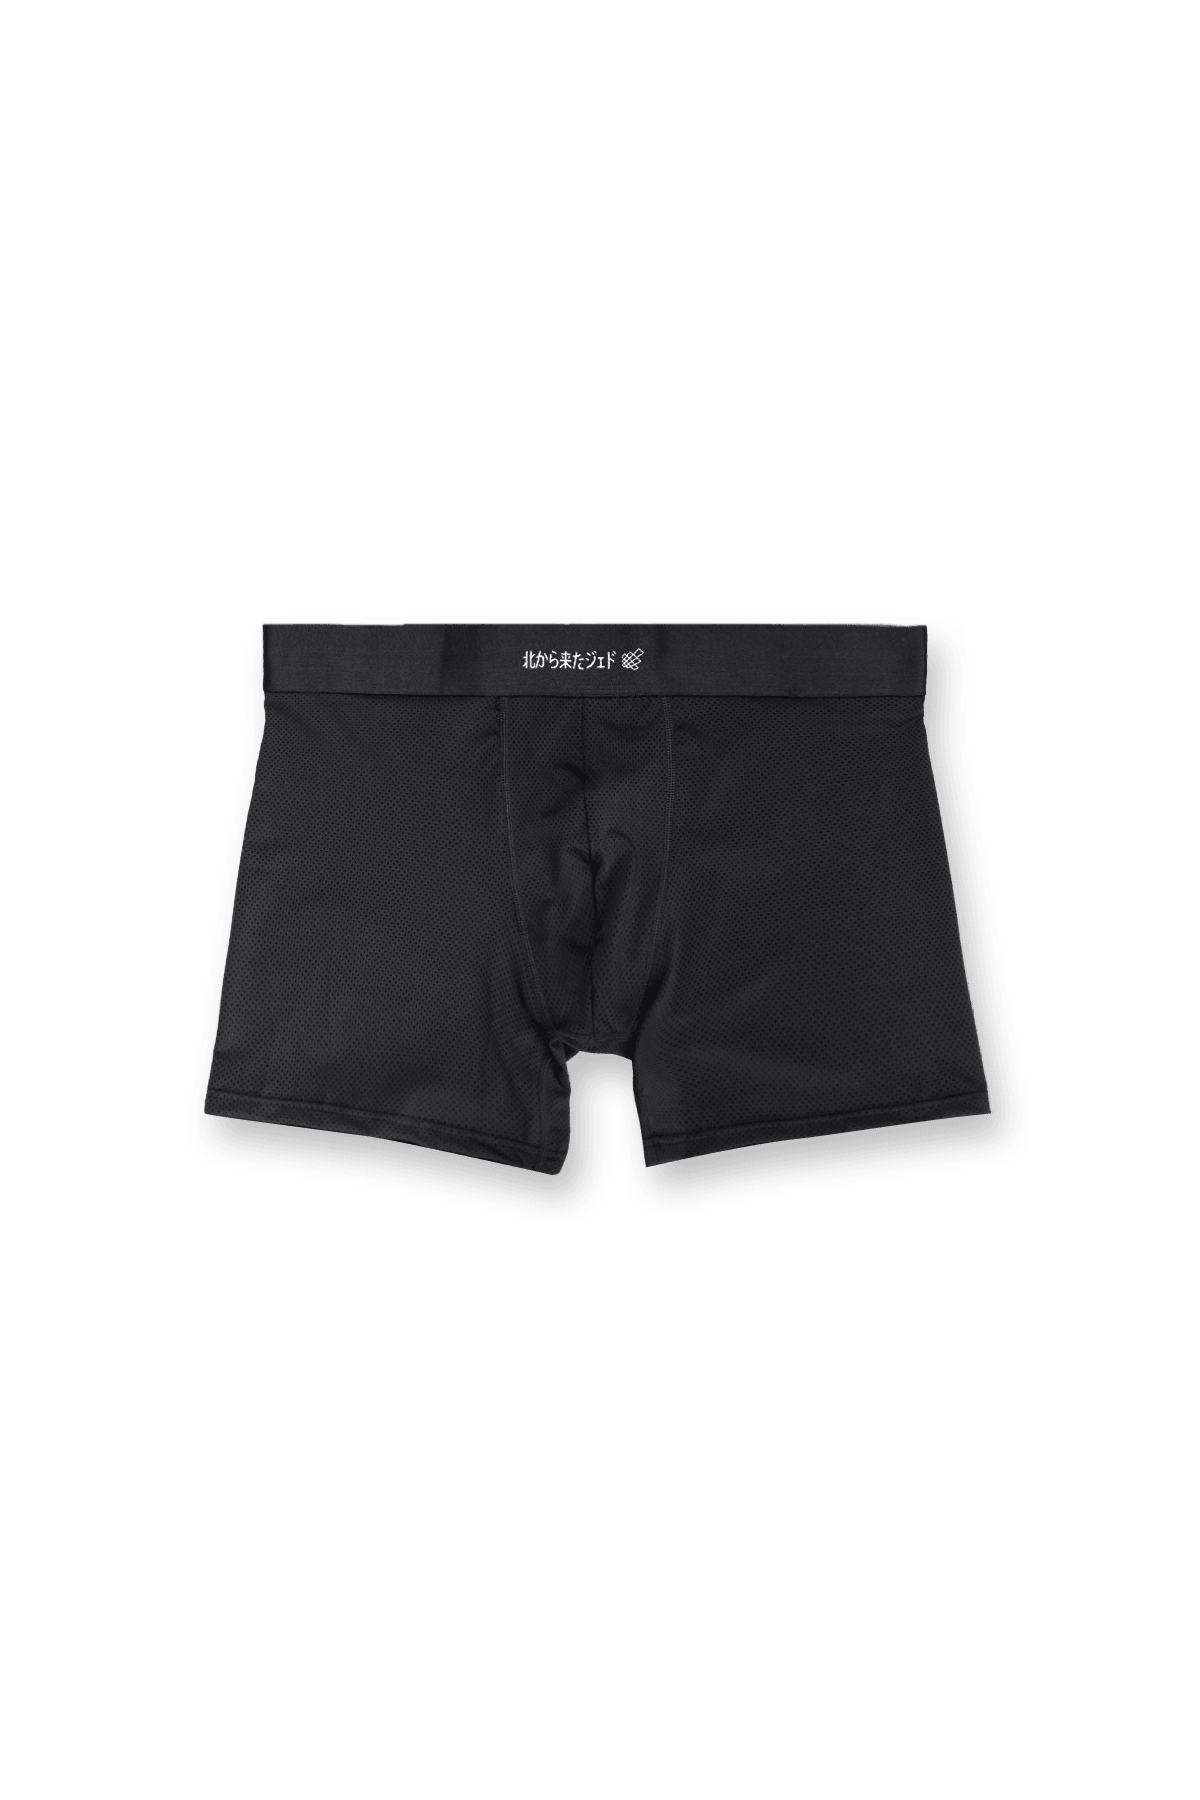 Men's Full Mesh Boxer Briefs 2 Pack - Black and Gray - Jed North Canada